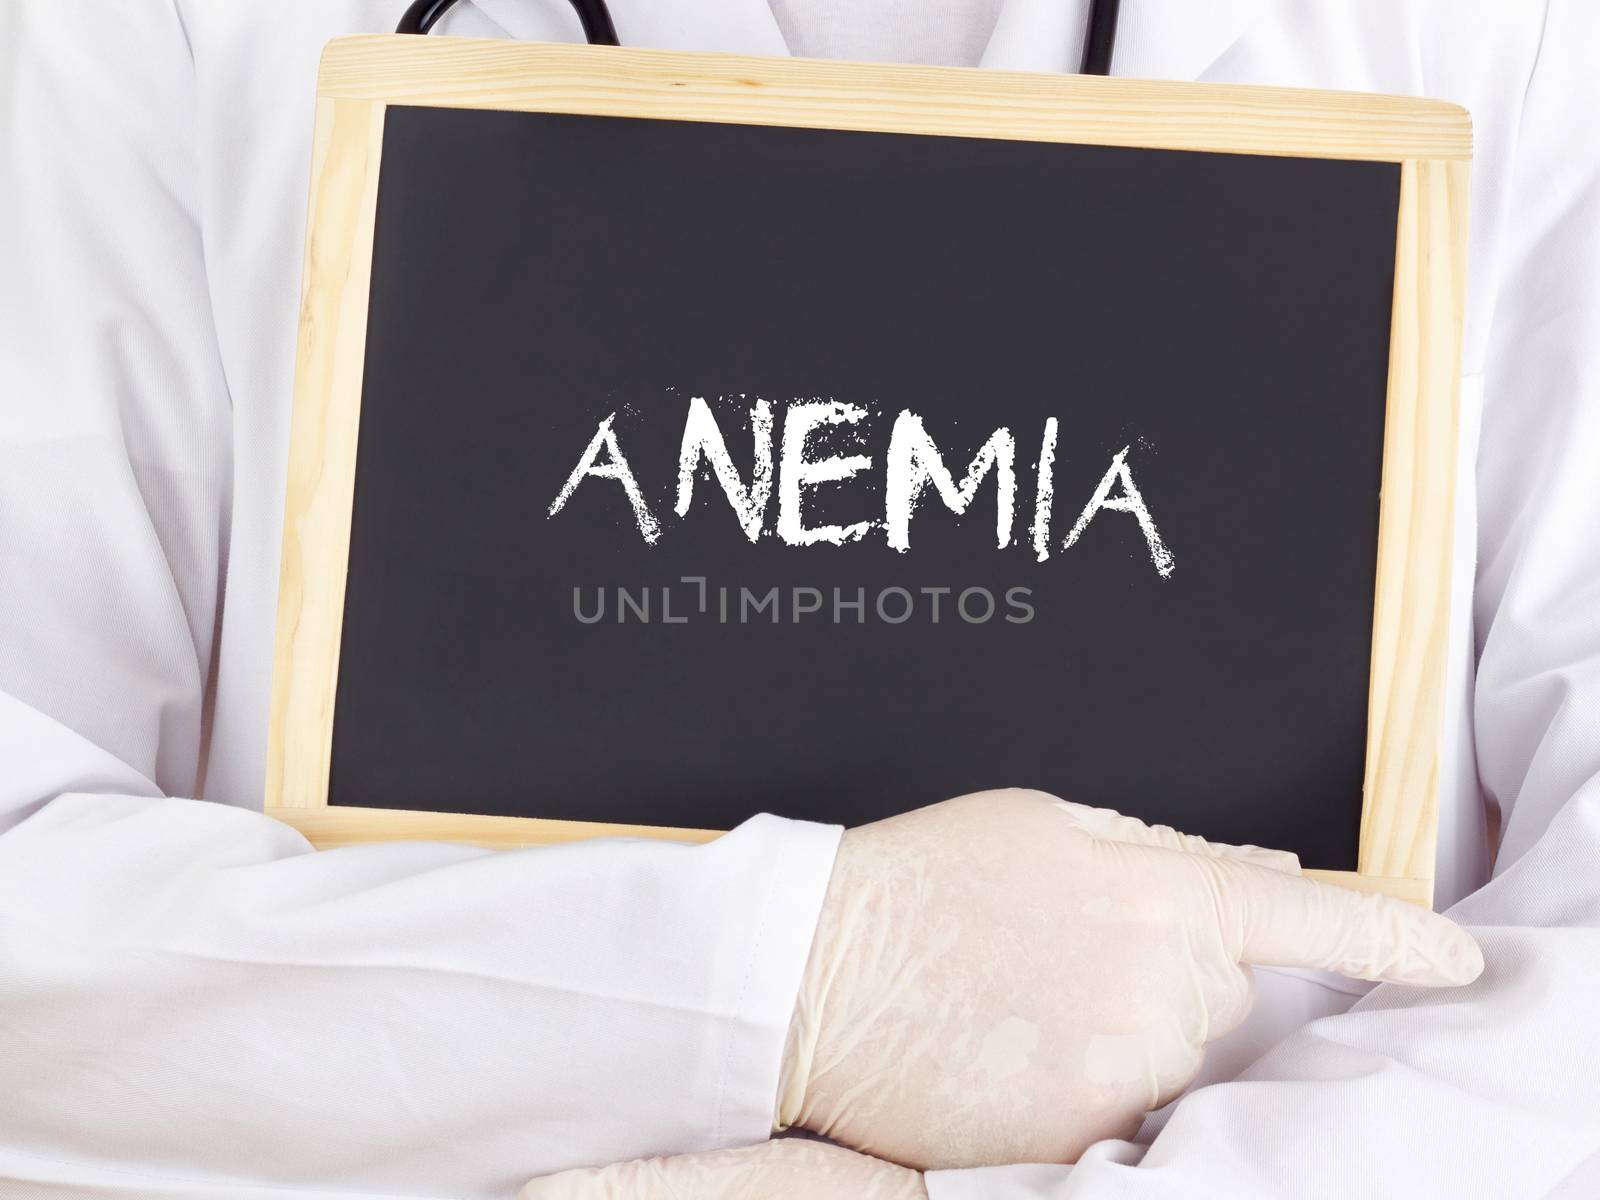 Doctor shows information on blackboard: anemia